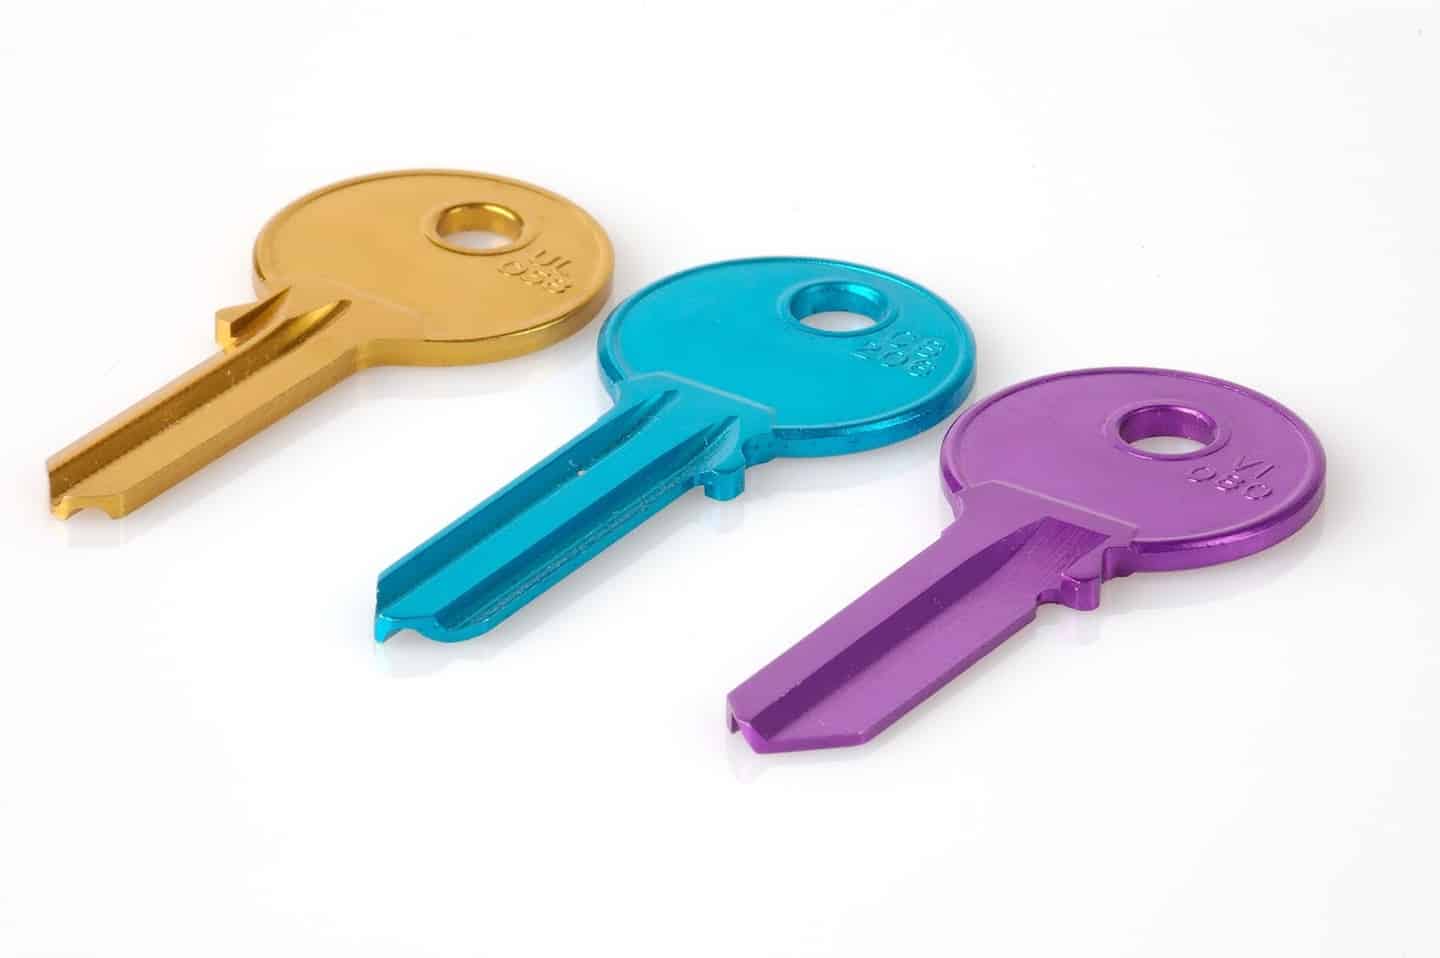 A yellow key, turquoise key, and purple key lying on a white background.